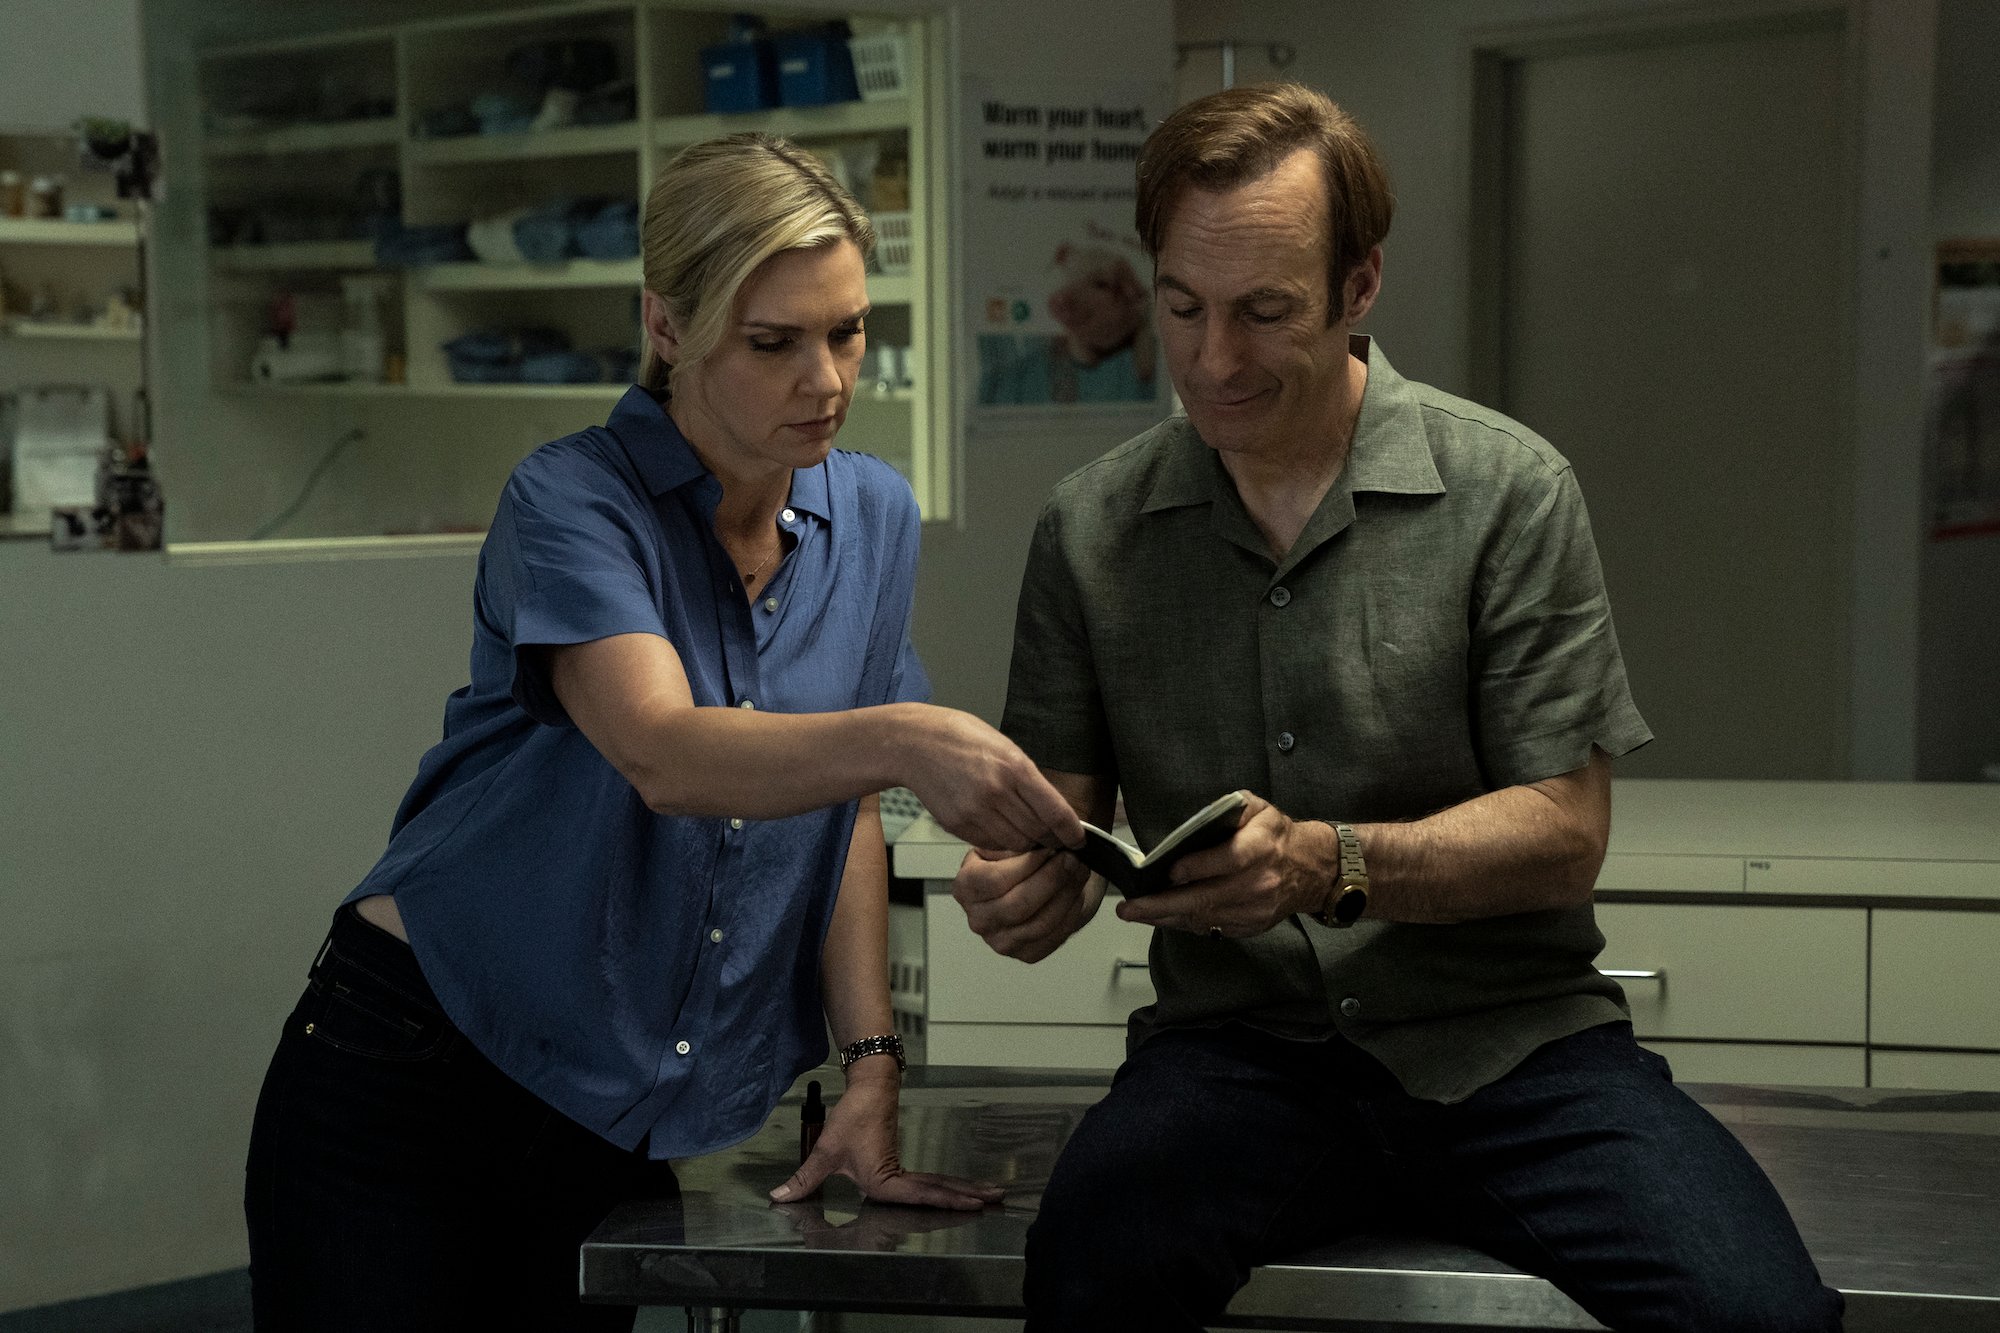 'Better Call Saul' Season 6: Kim (Rhea Seehorn) and Jimmy (Bob Odenkirk) peruse a coded black book in a season that took an extra 3 months to write